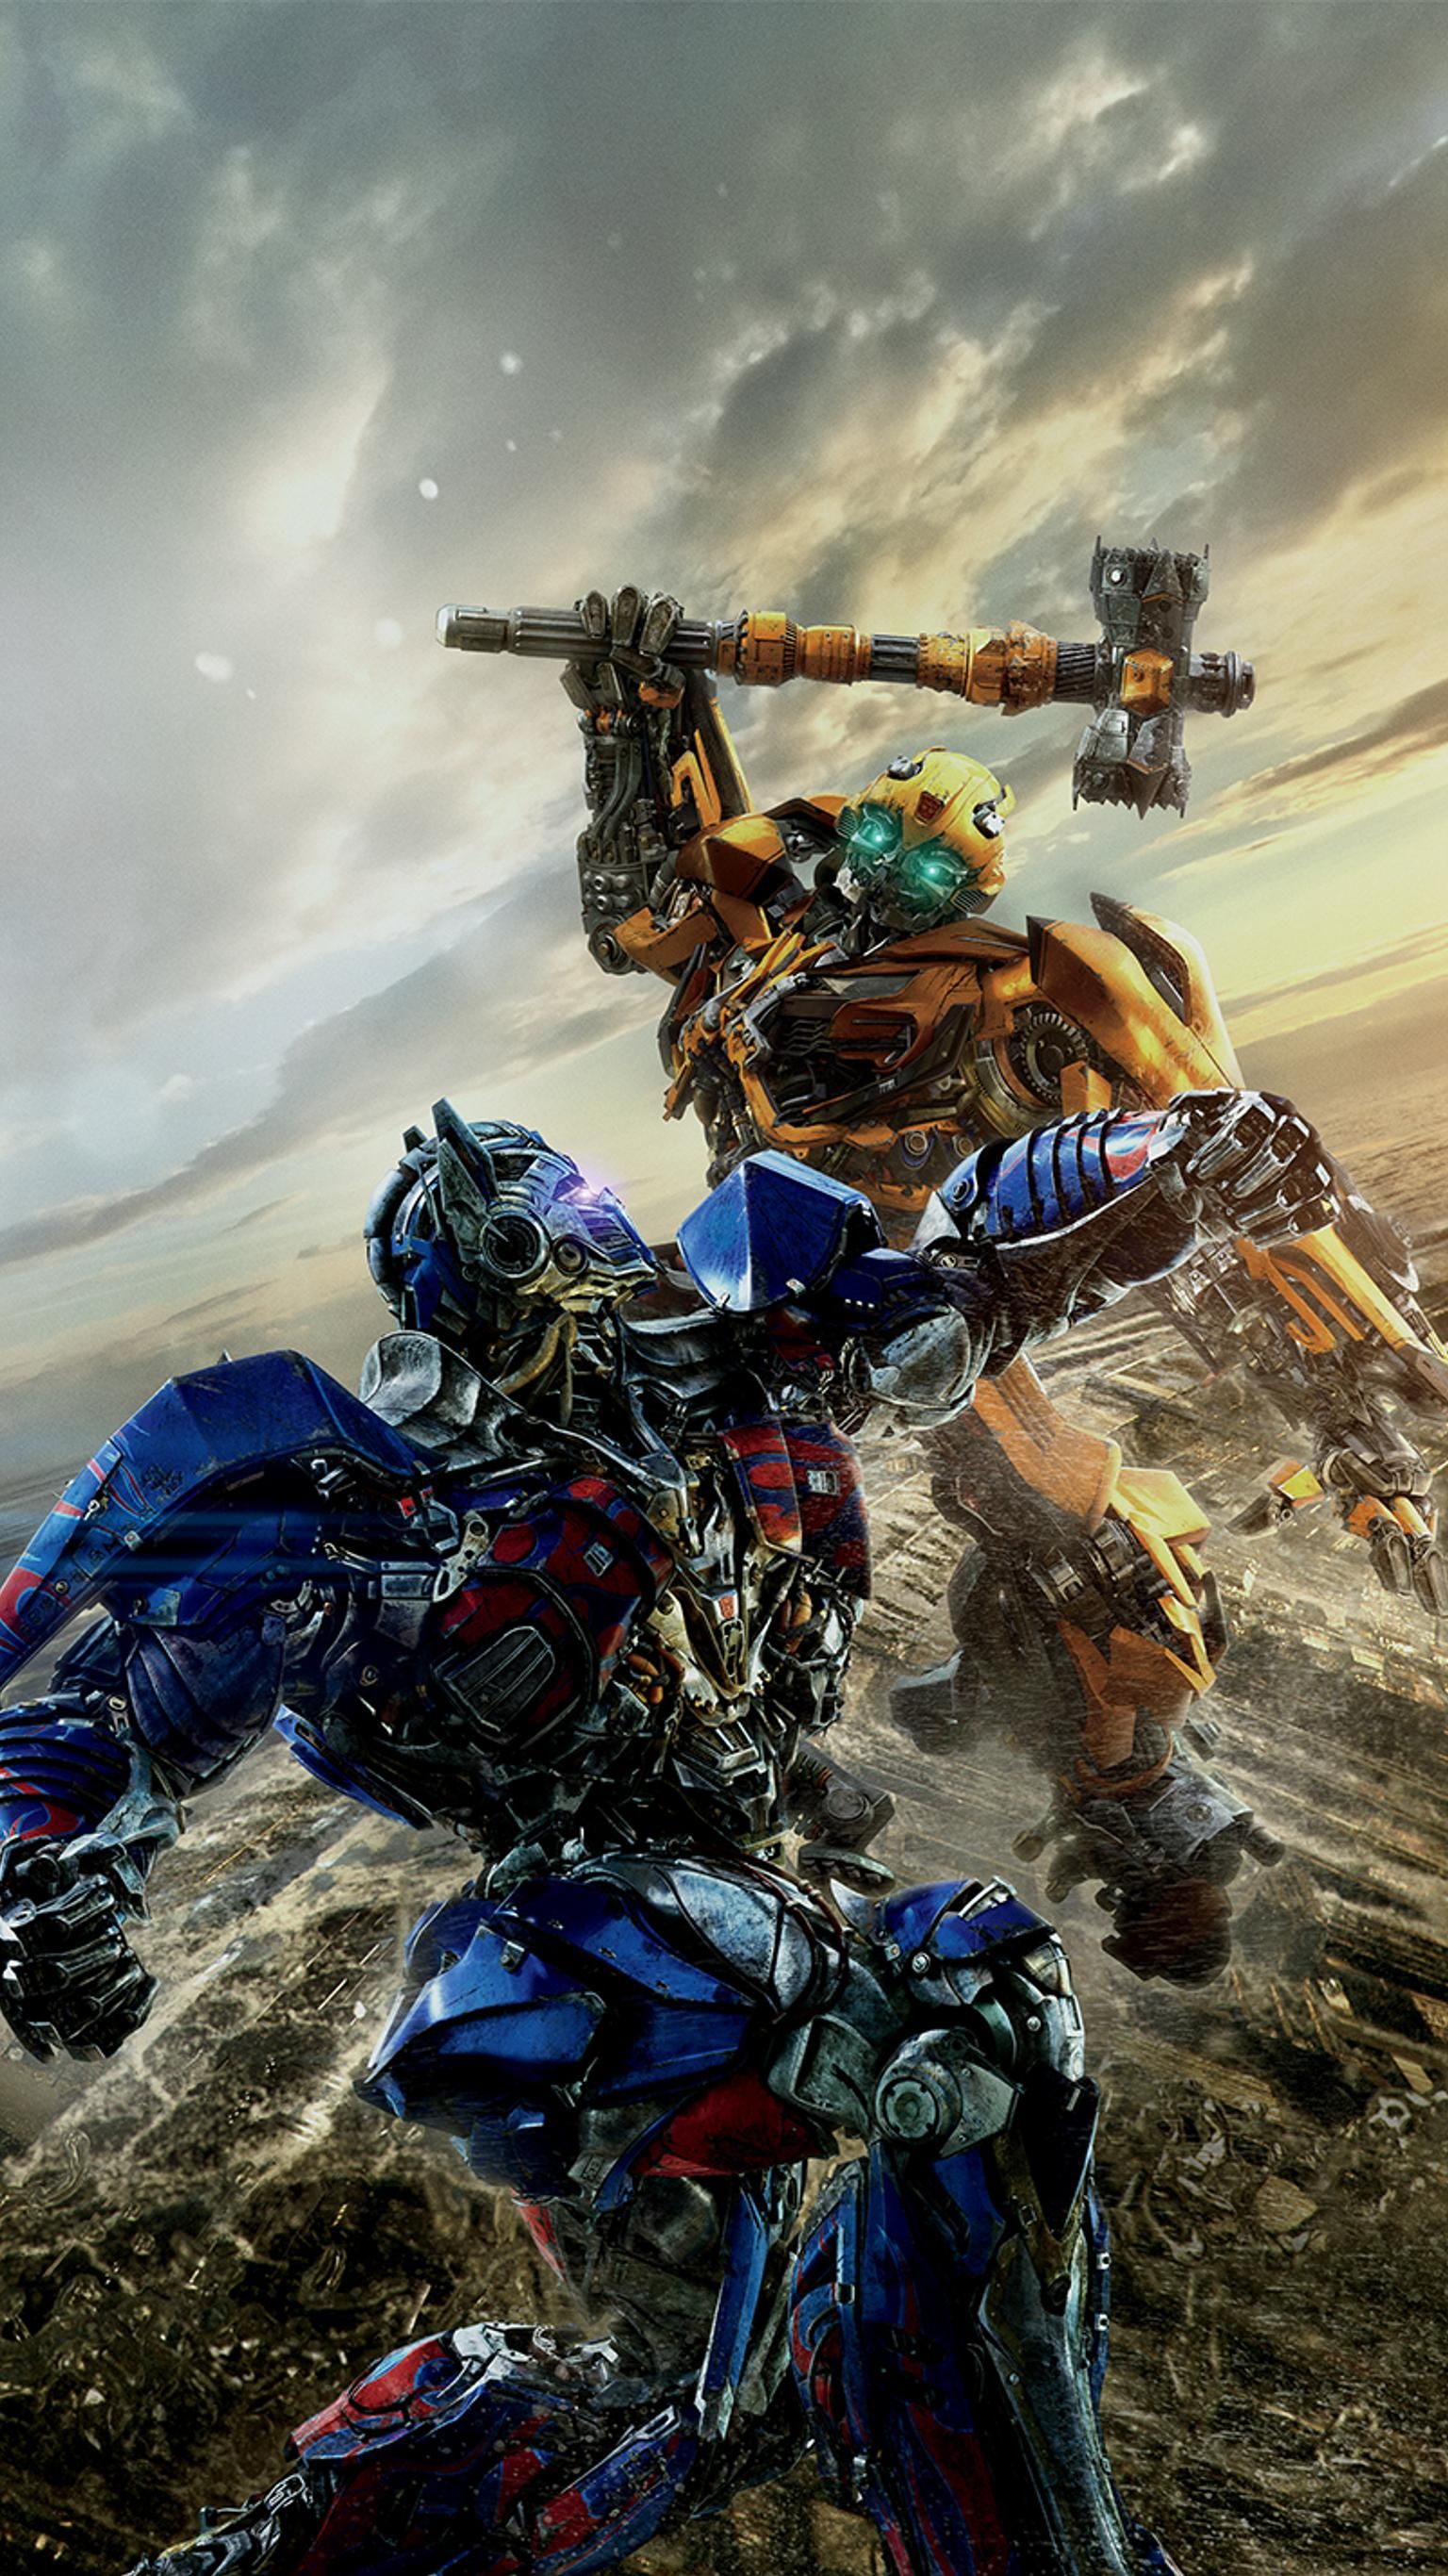 Transformers The Last Knight 2017 Movie Poster Wallpapers